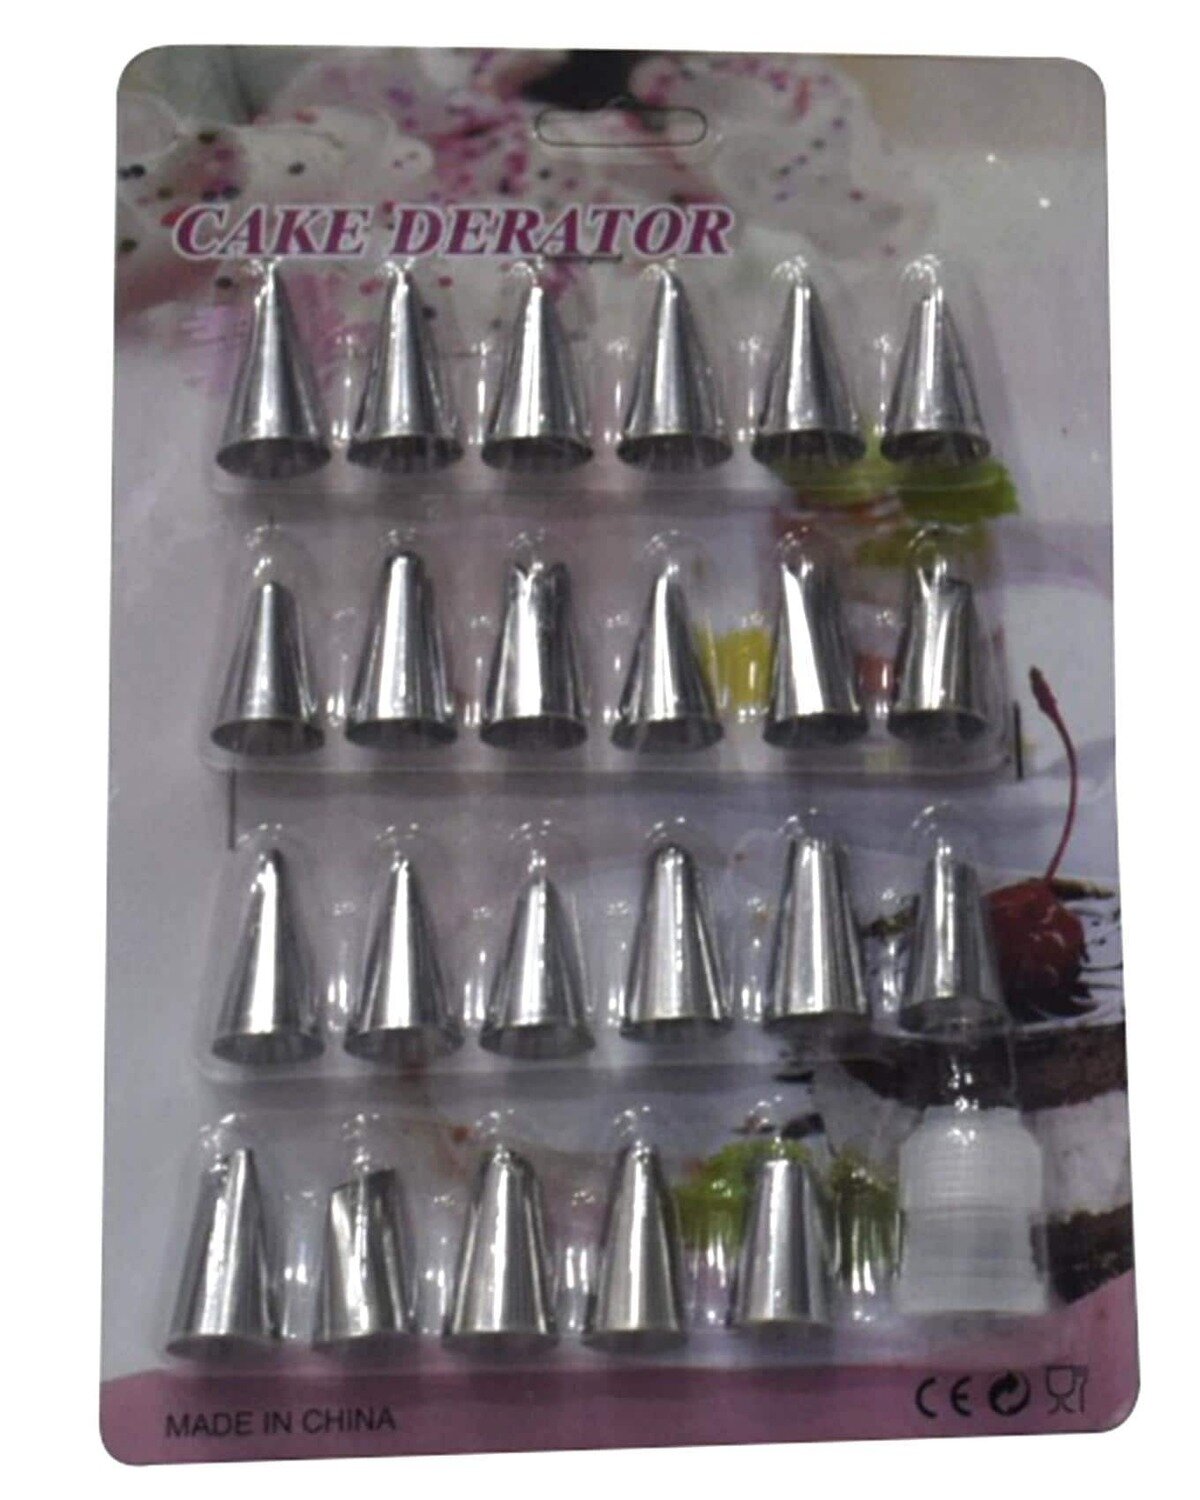 23 Cake Nozzles Set With Coupler Cake Tool